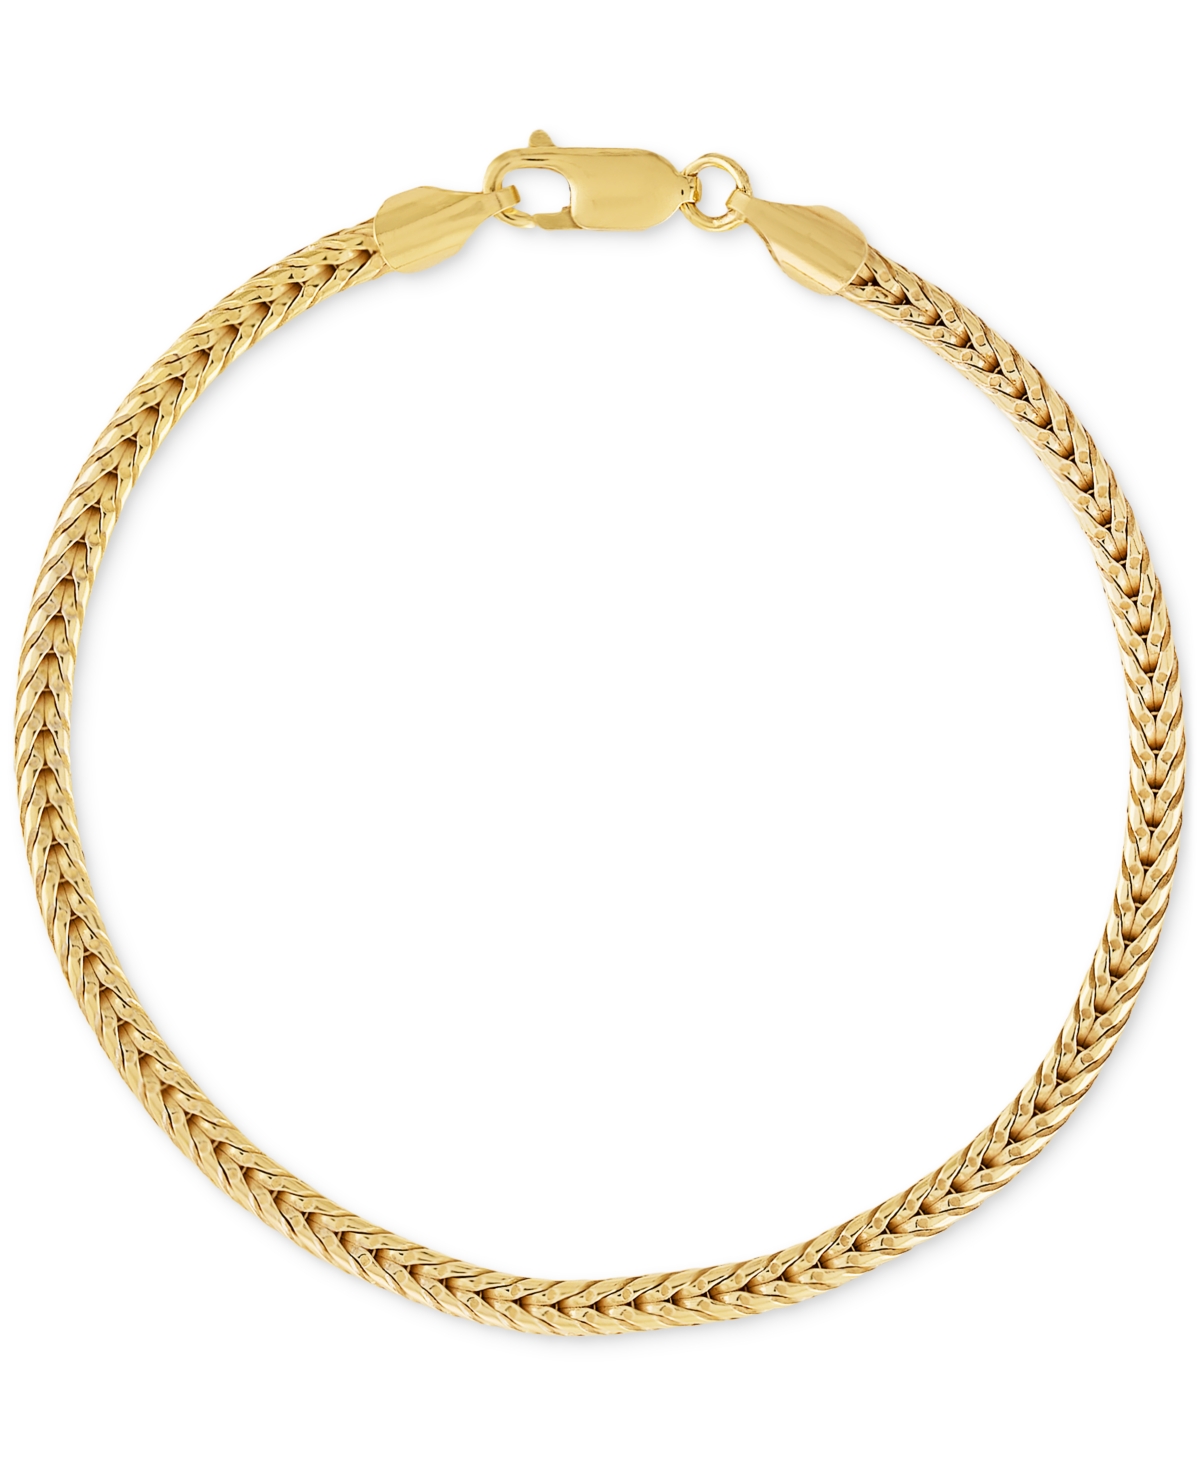 Squared Franco Link Chain Bracelet in 14k Gold-Plated Sterling Silver, Created for Macy's - Gold